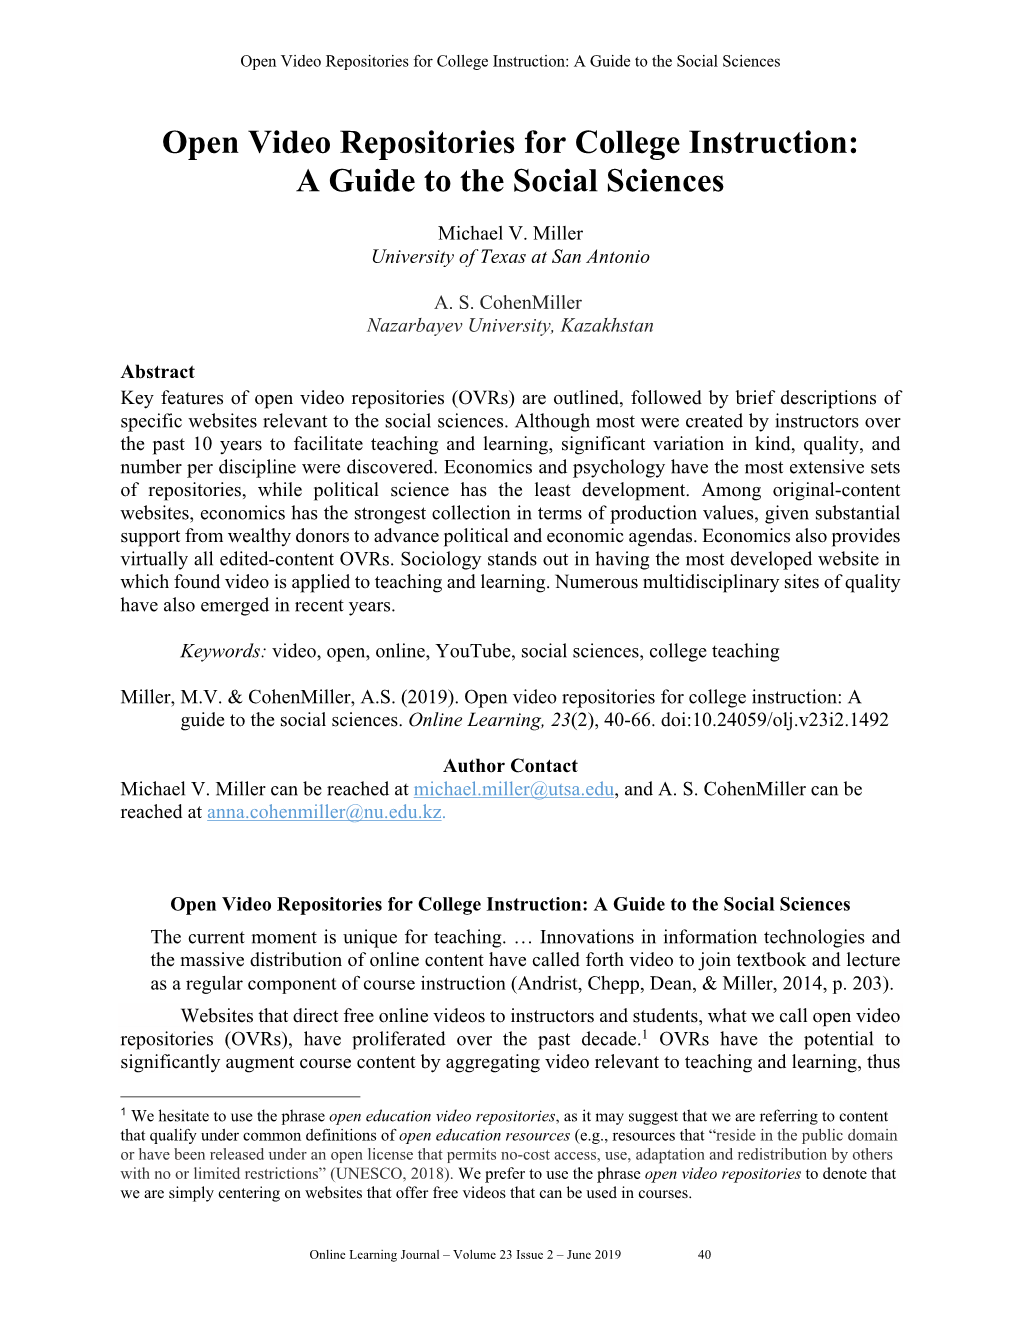 Open Video Repositories for College Instruction: a Guide to the Social Sciences